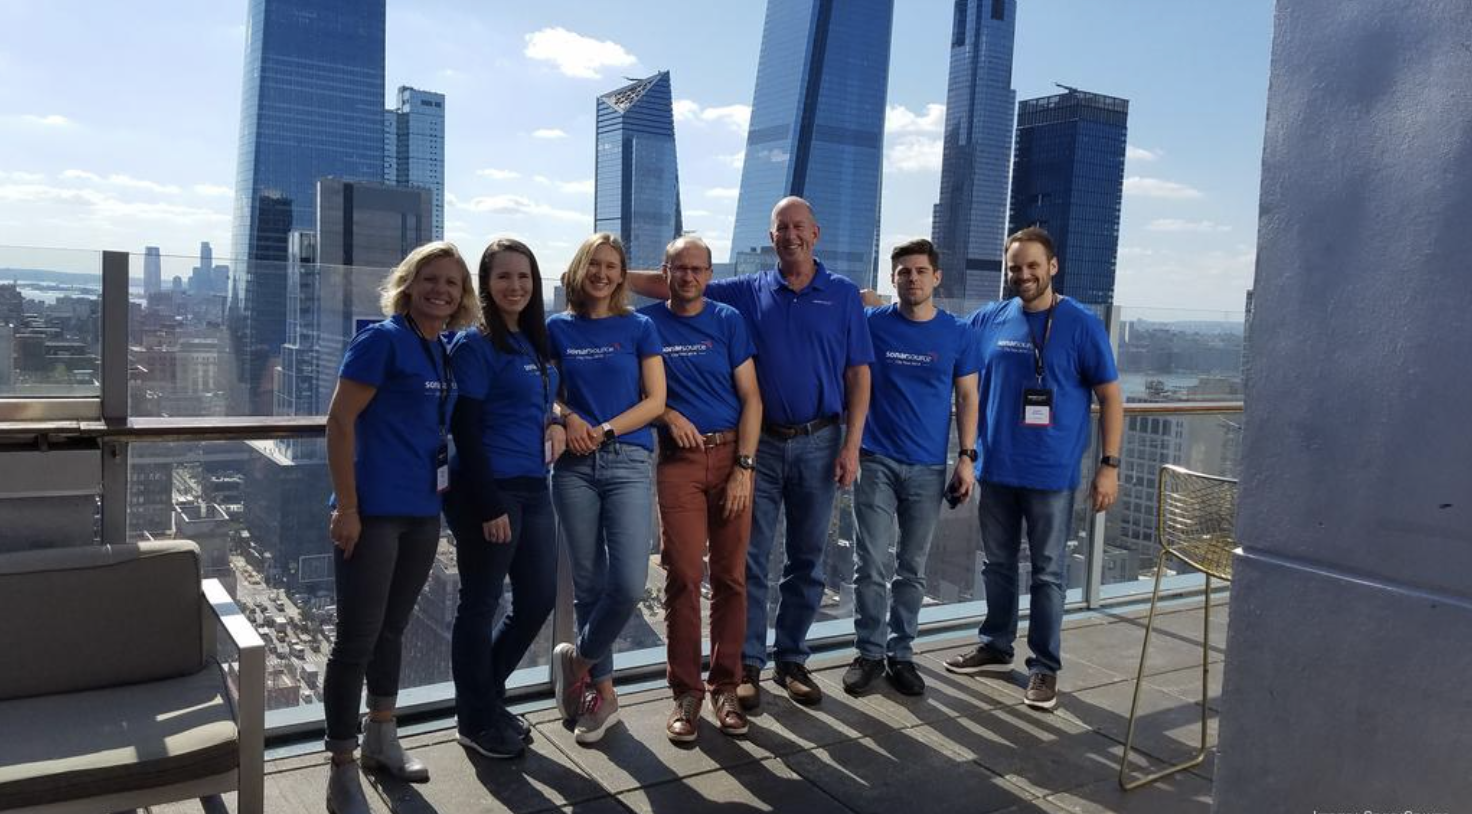 Sonar team standing on balcony with skyscrapers in background.